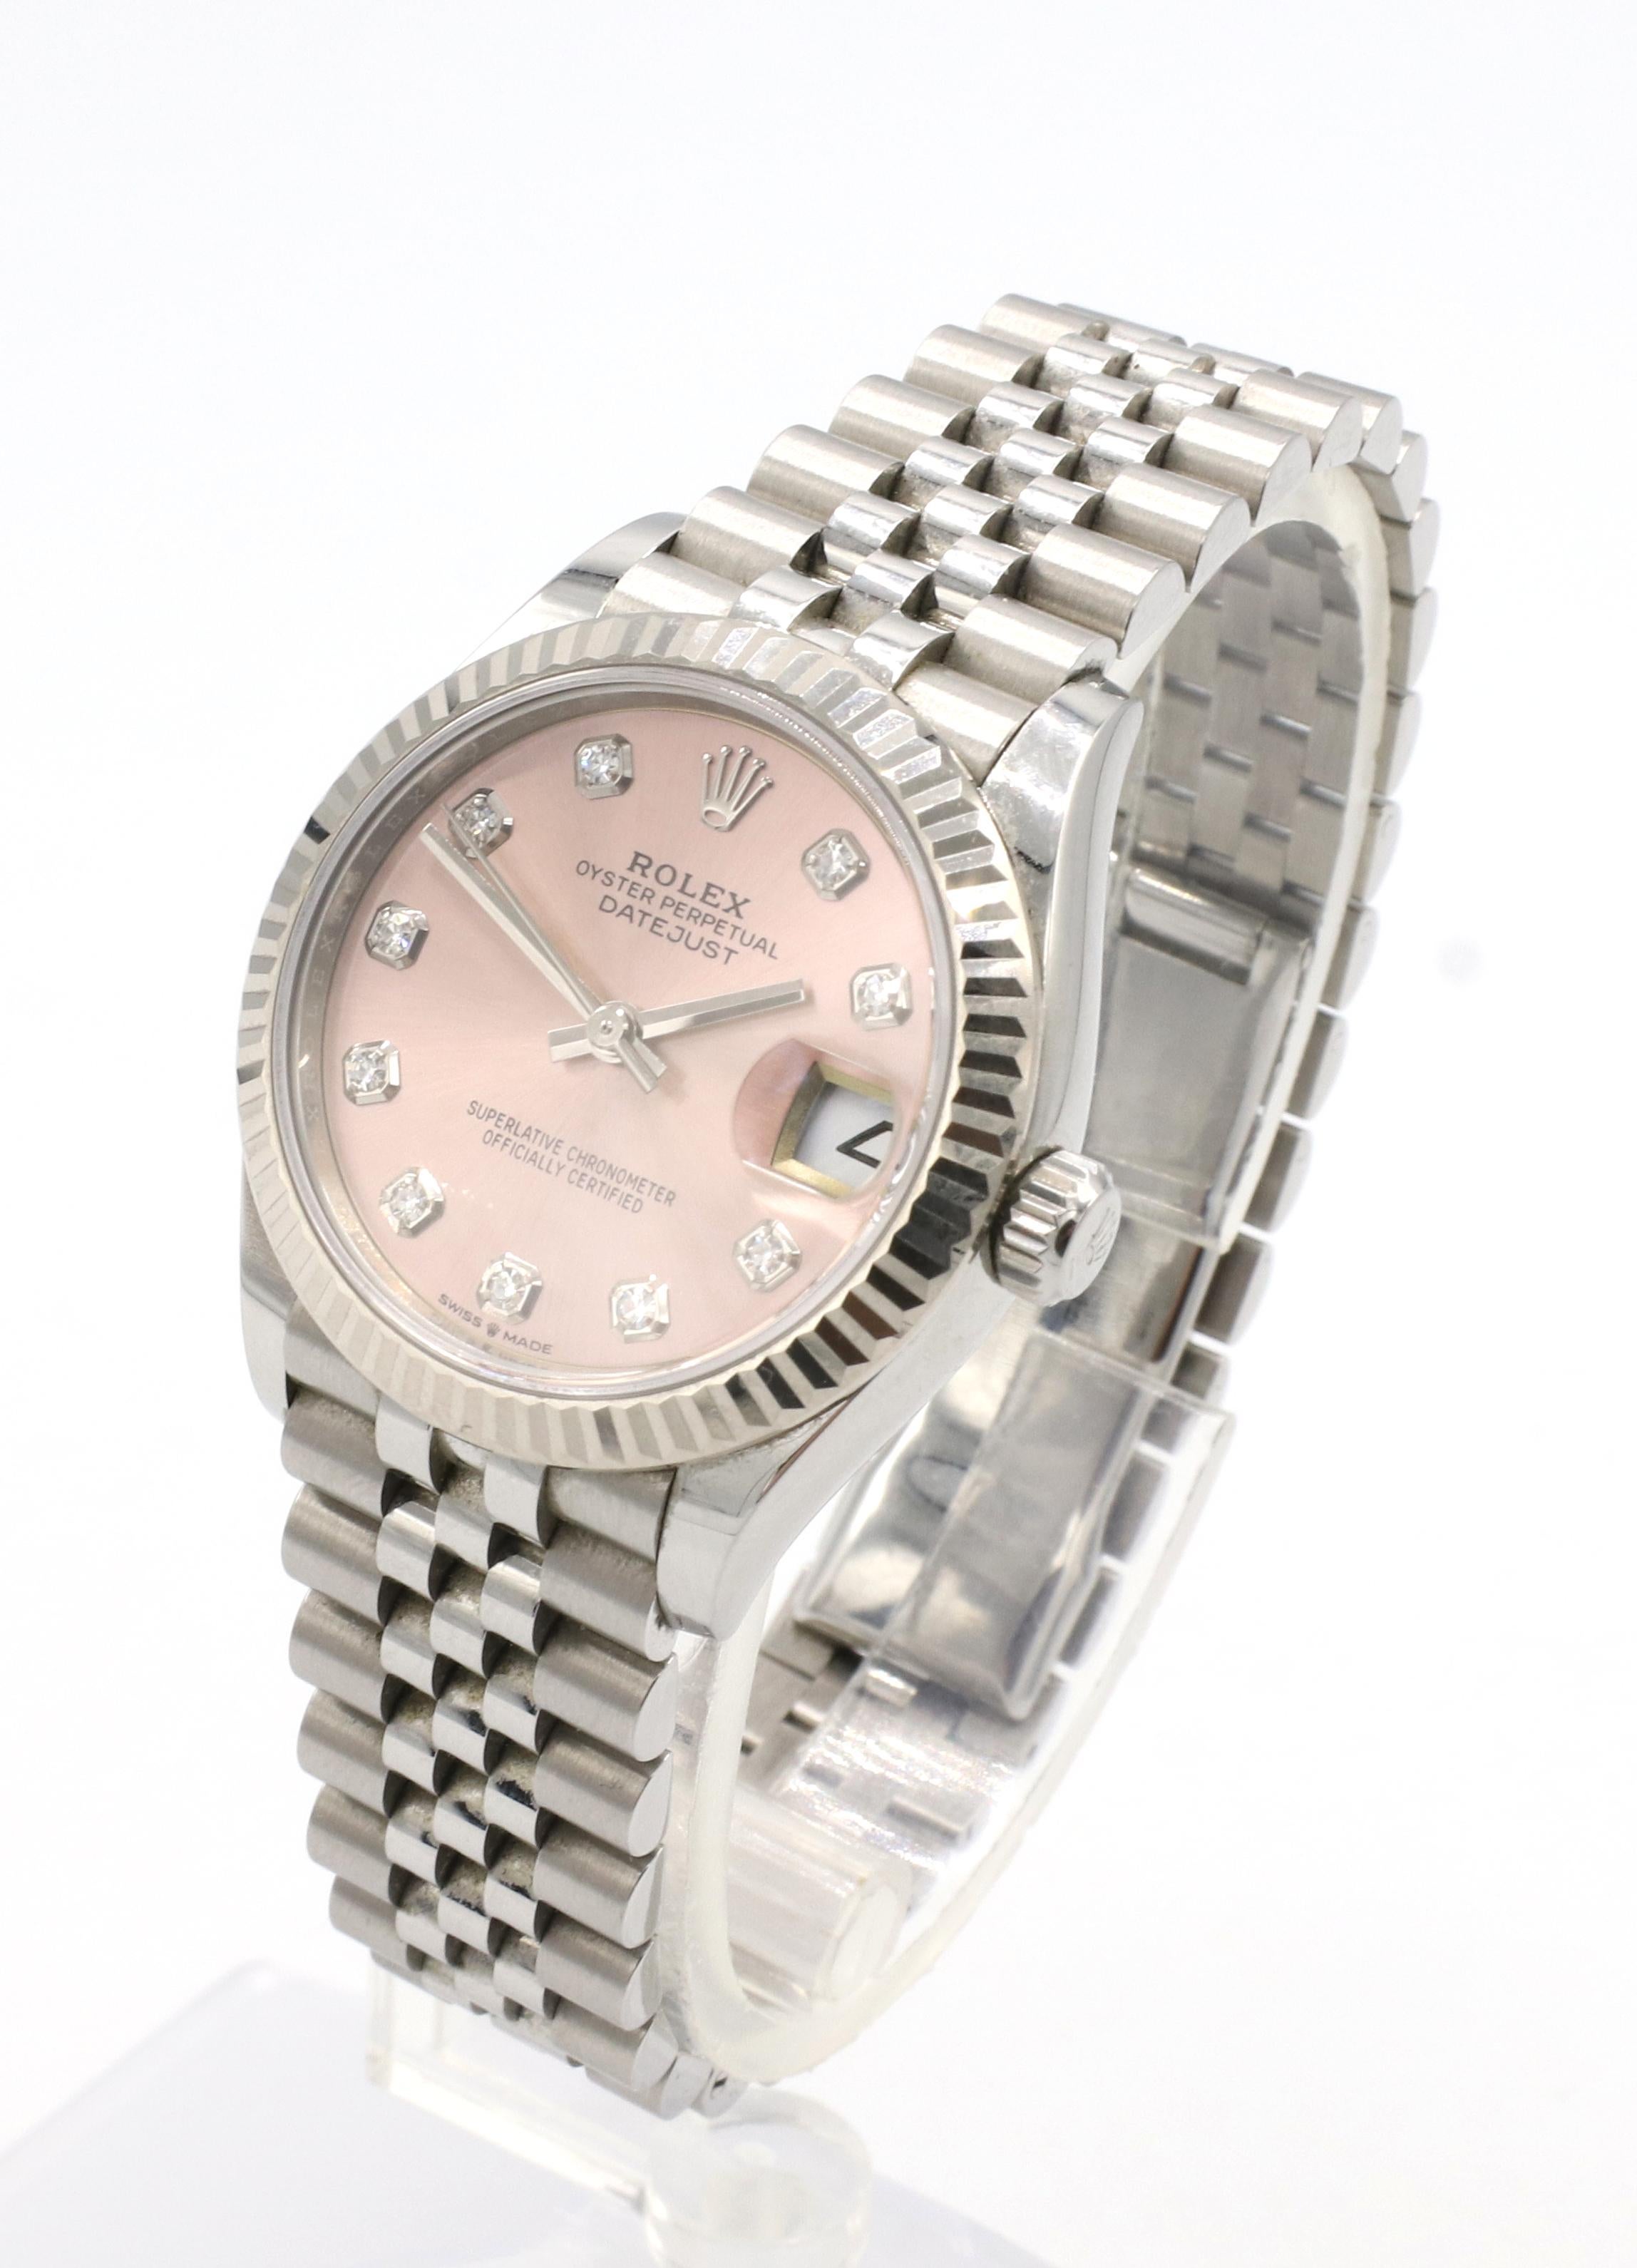 Modern Rolex Datejust 31 Stainless Steel Pink Diamond Dial Ladies Watch Reference 27827